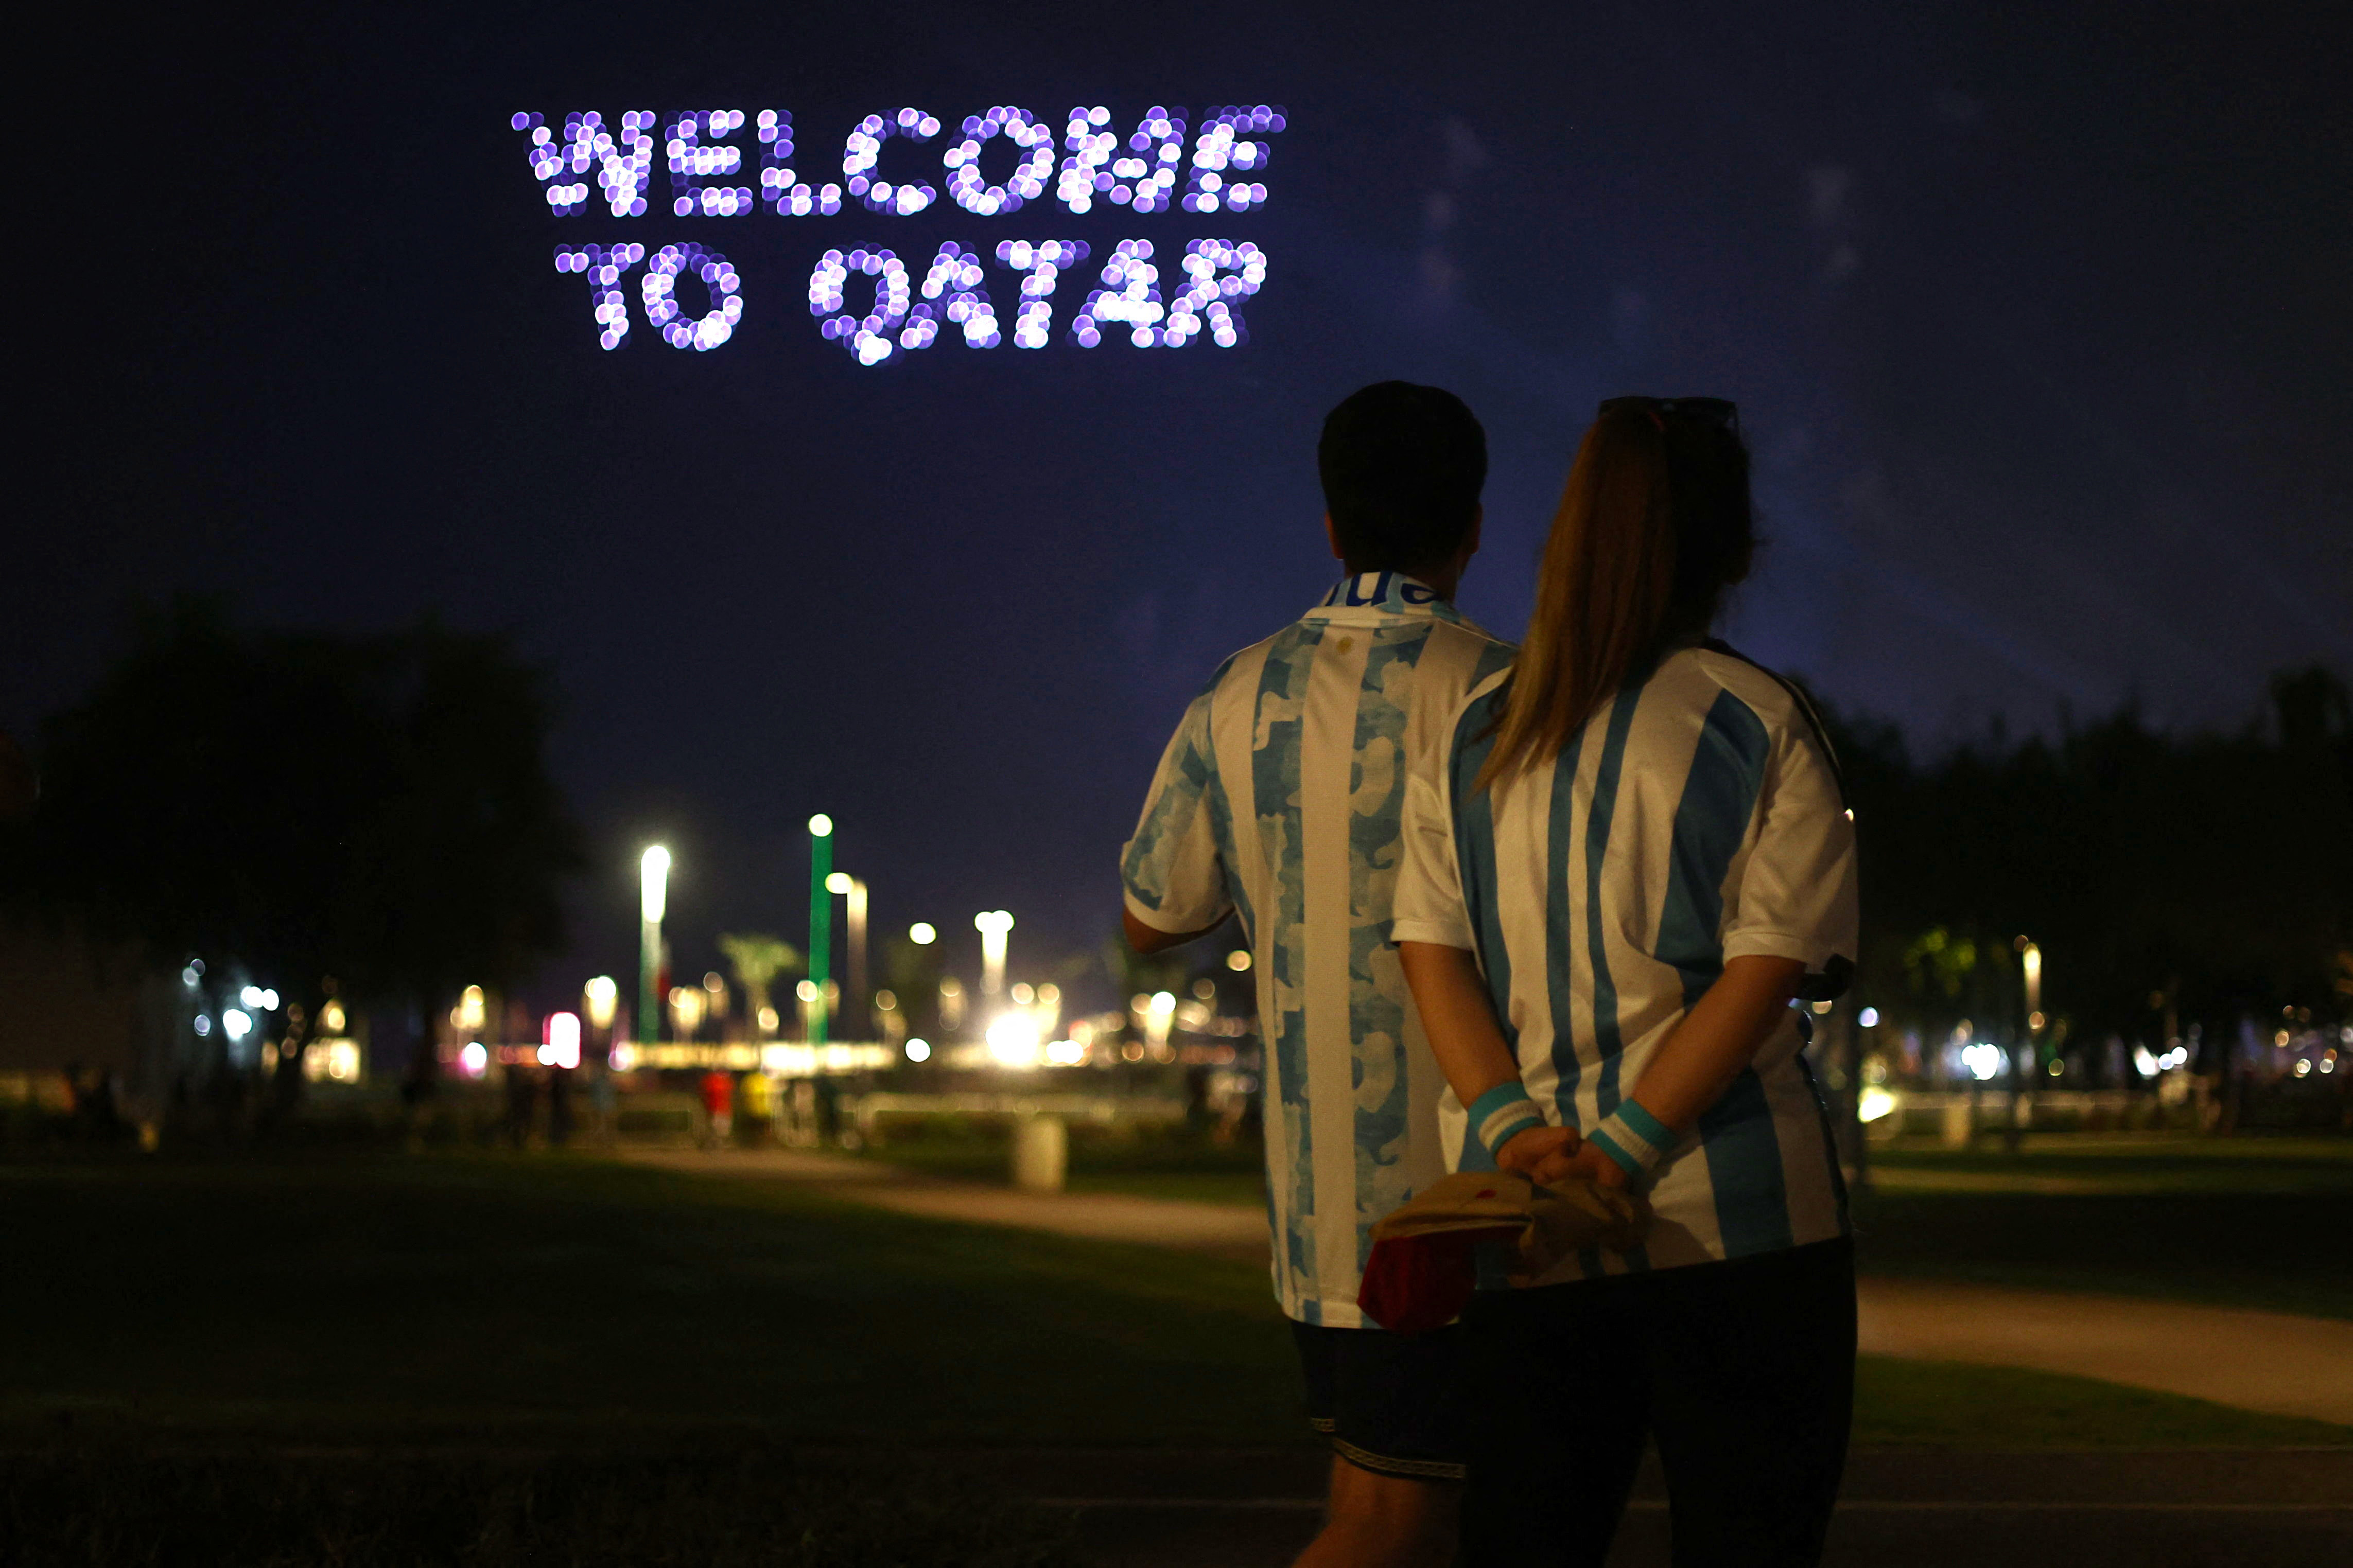 Soccer Football - FIFA World Cup Qatar 2022 - Doha, Qatar - November 22, 2022 Argentina fans look at a 'Welcome to Qatar' sign in the Corniche fan zone during a light and fireworks show REUTERS/Pedro Nunes